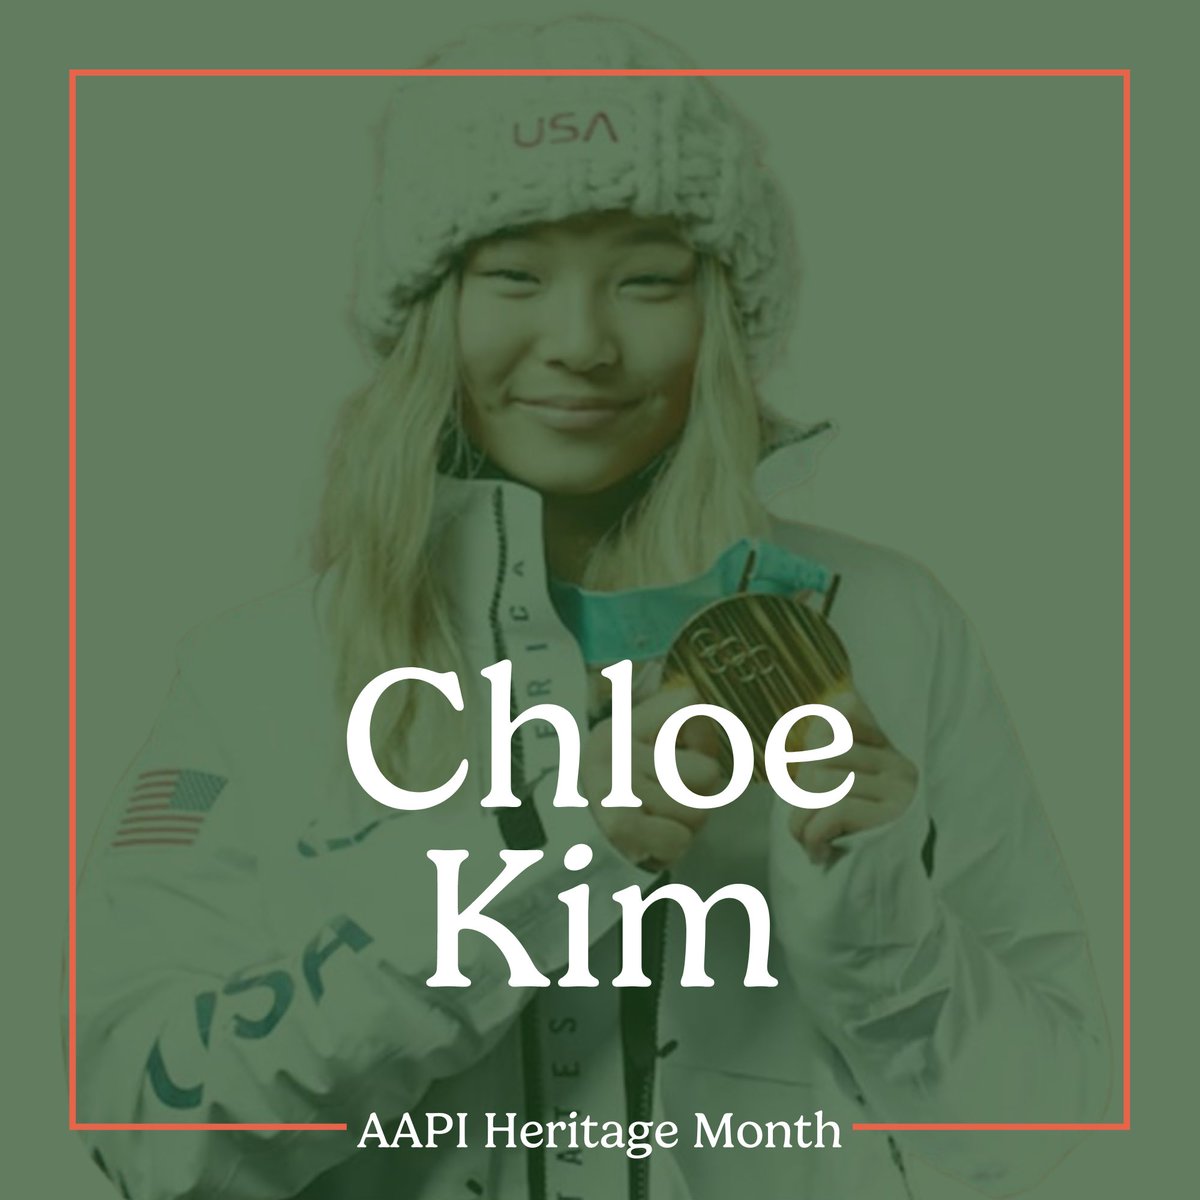 Let’s celebrate AAPI excellence in sports & recognize the incredible achievement of AAPI athletes who have broken barriers, inspiring countless individuals & paving the way for future generations! #CAAPLEproud #AAPIHeritageMonth